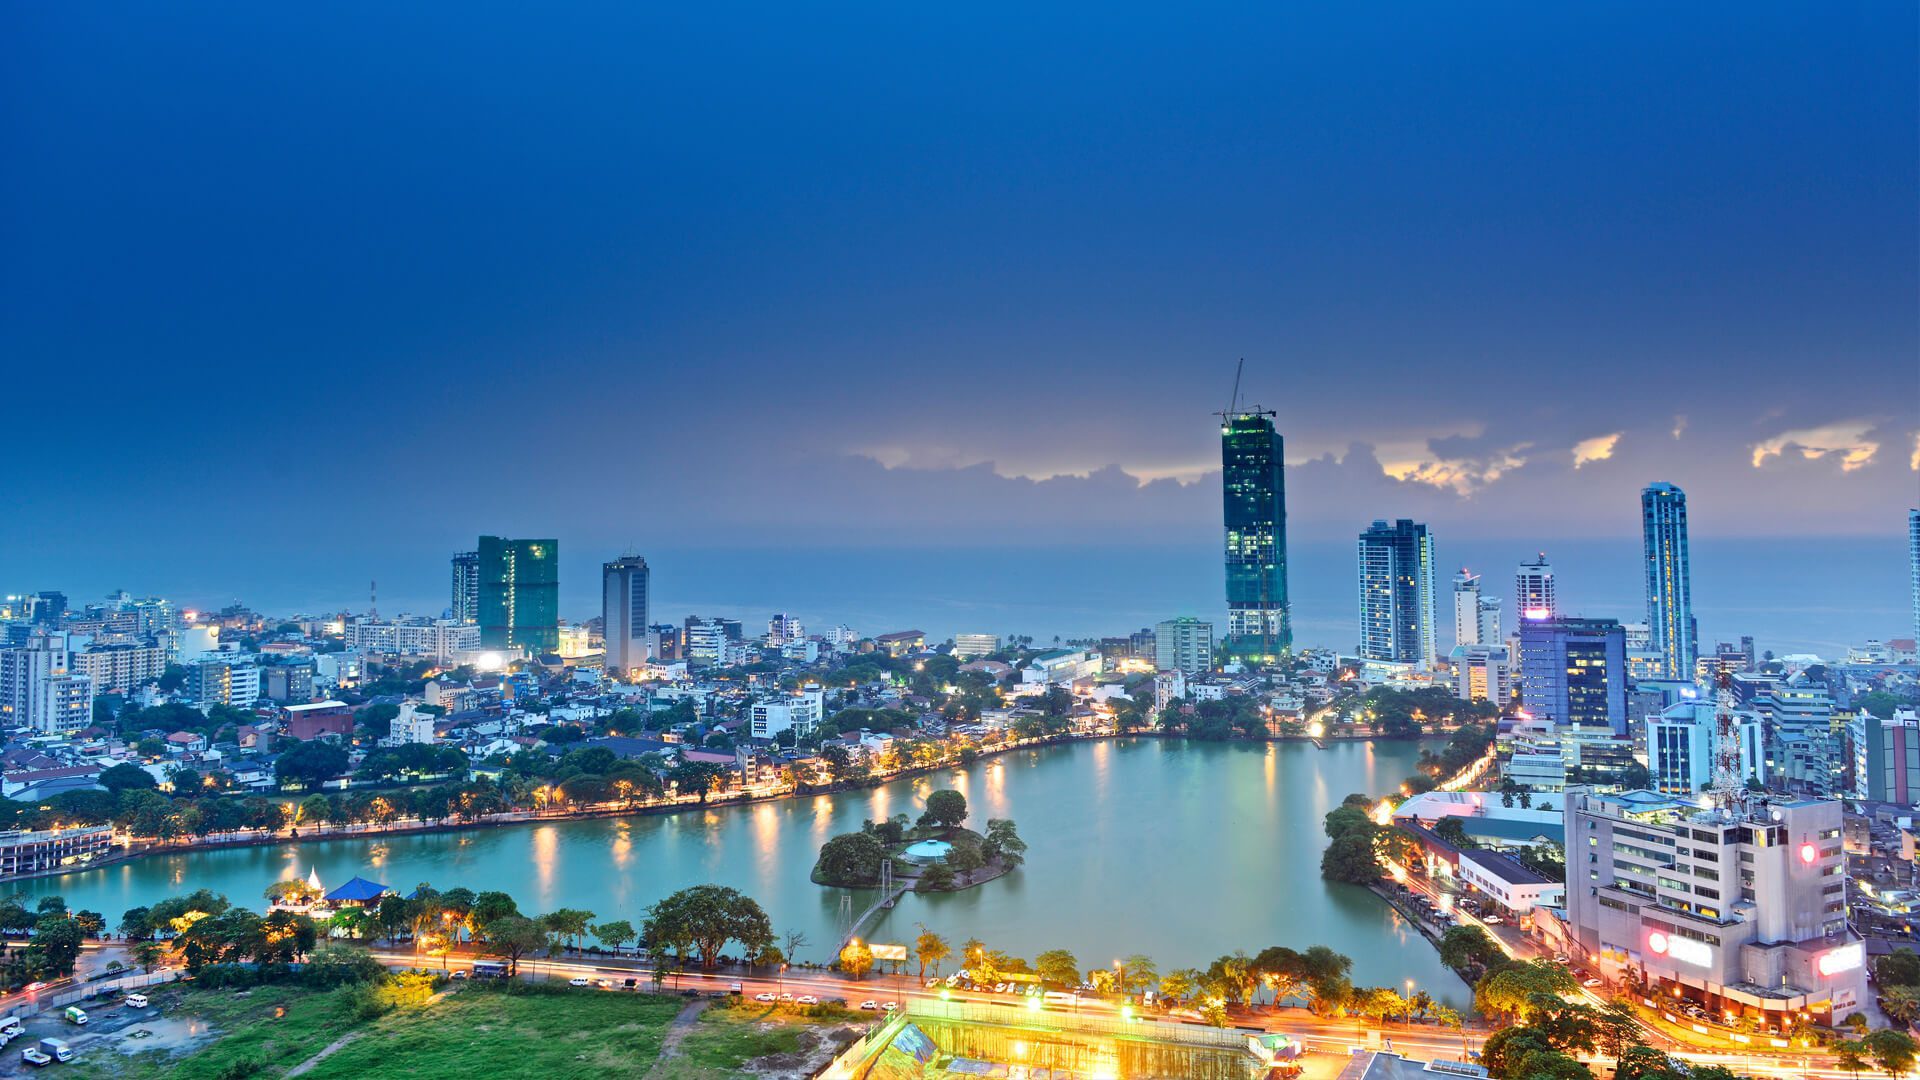 Experience Colombo like never before